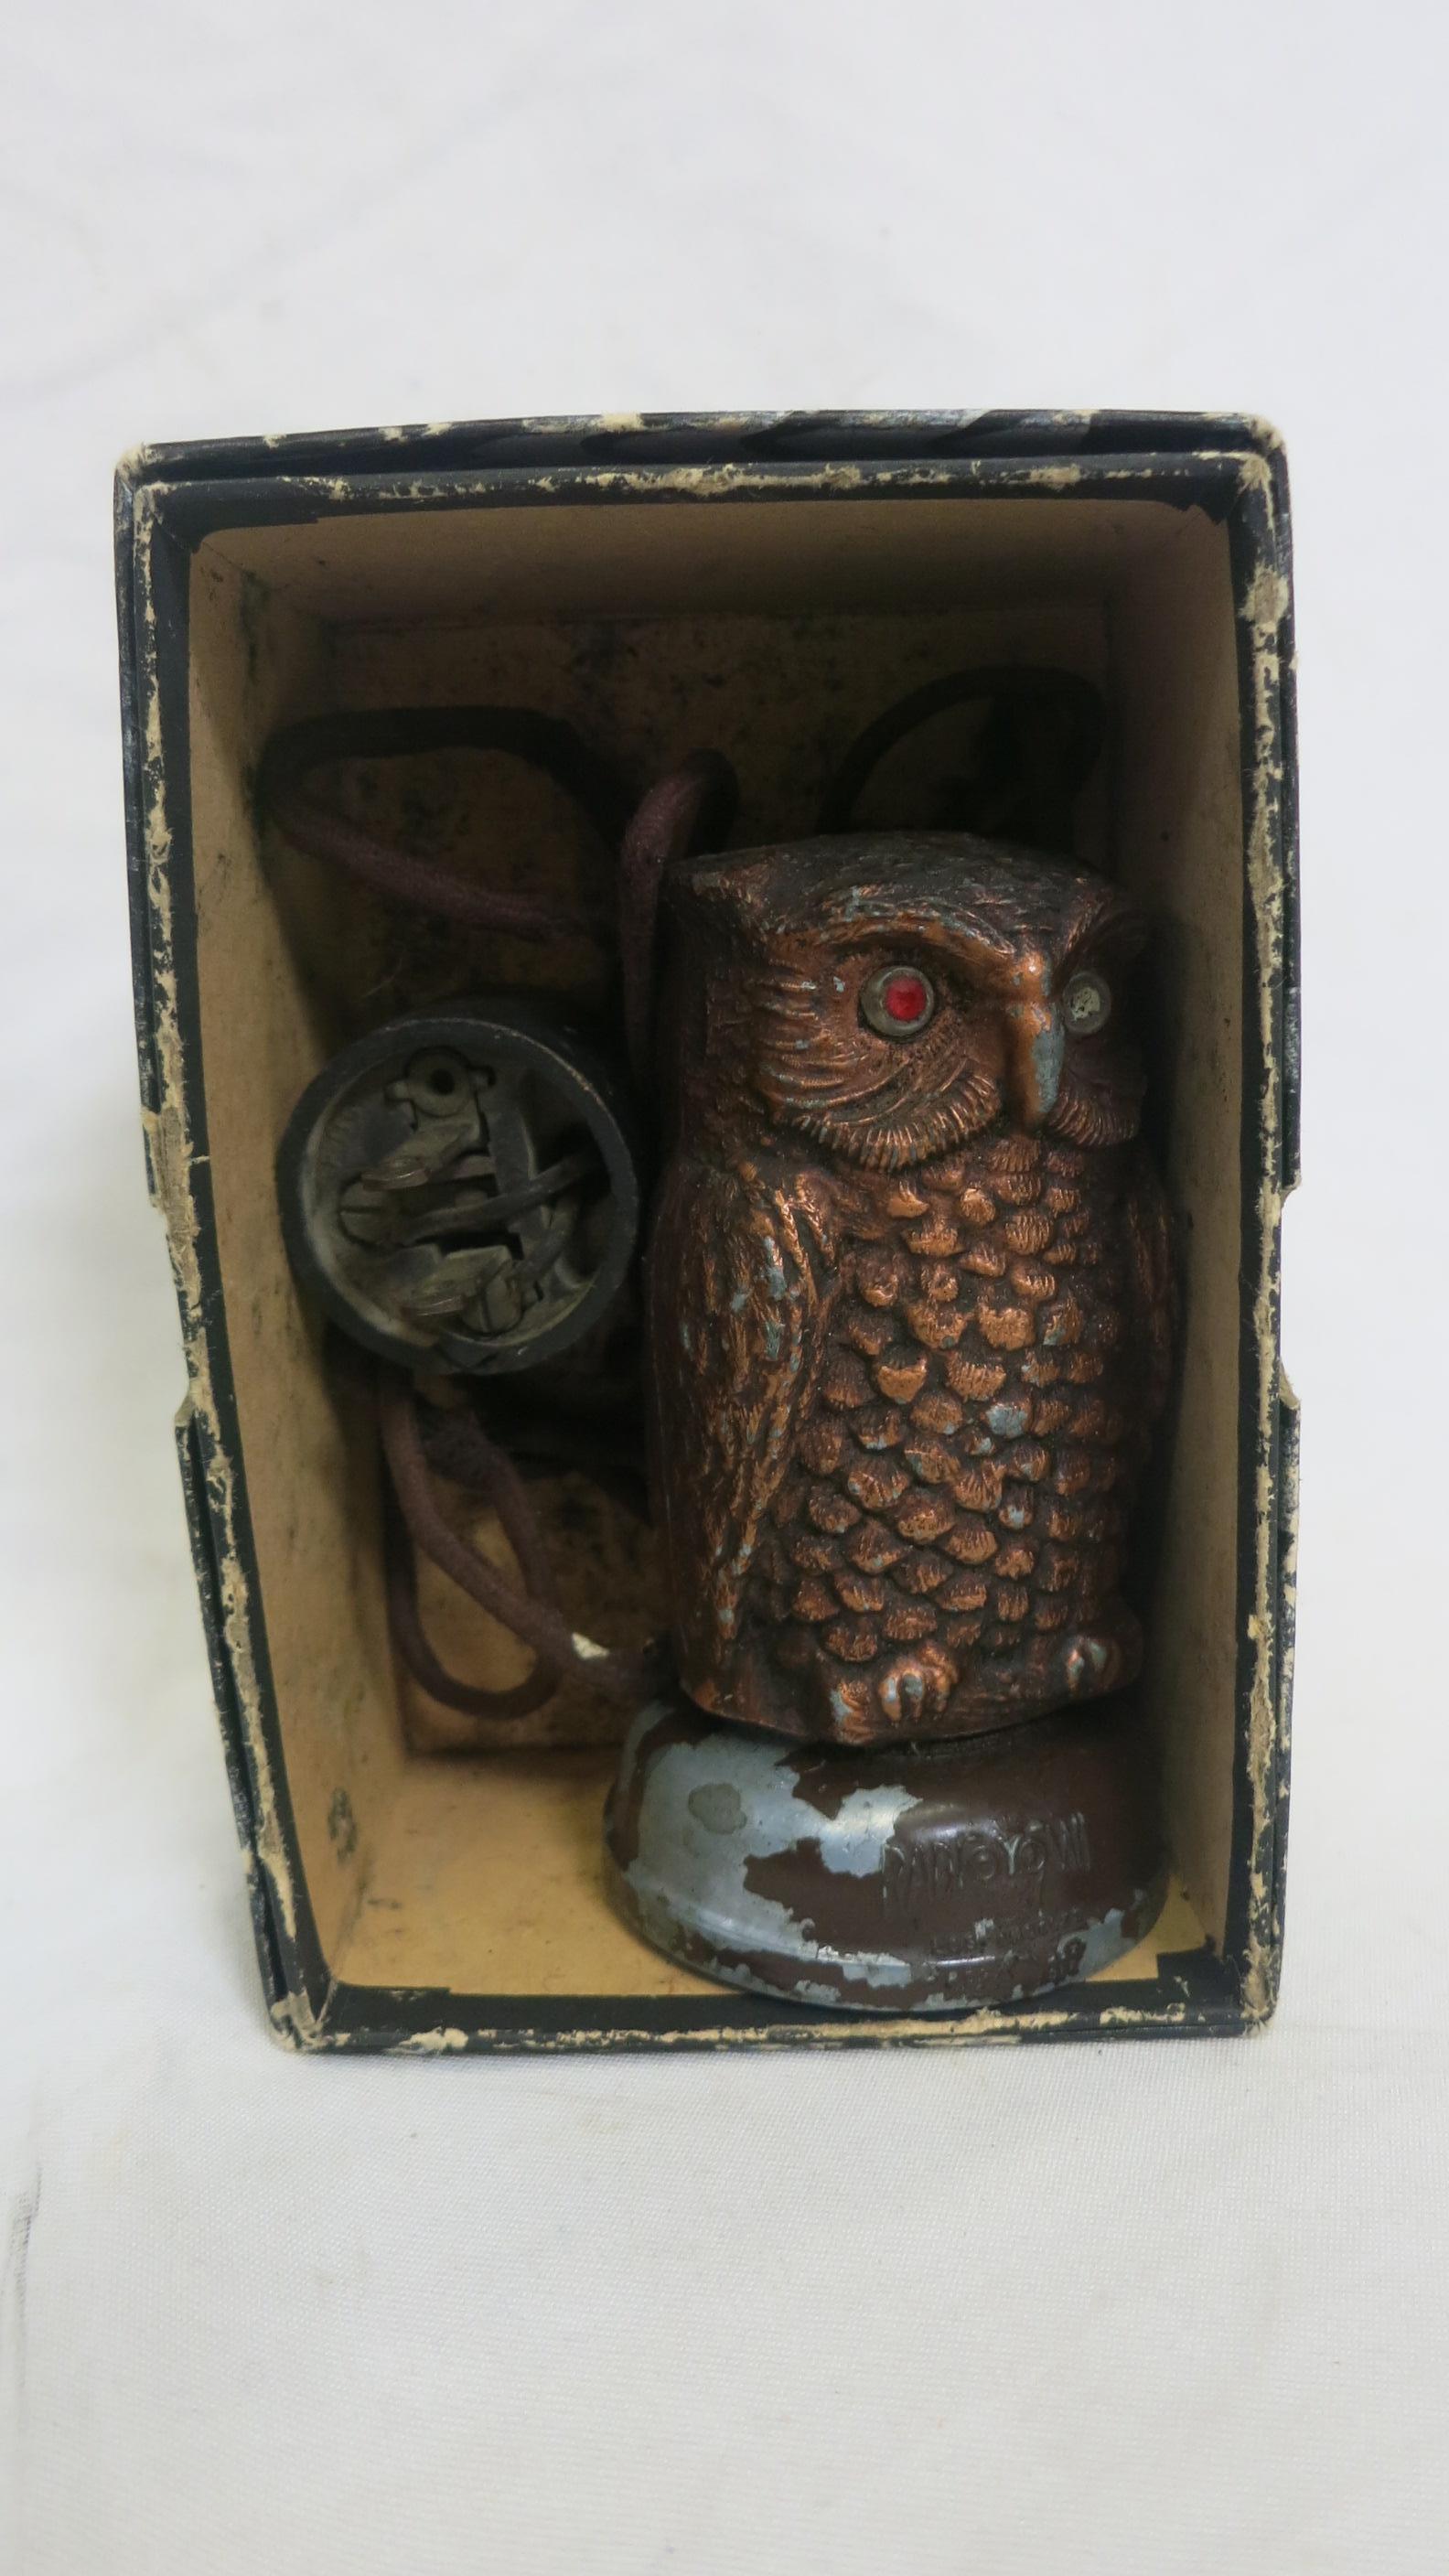 Vintage electric owl timer. Copper-painted metal red jewel style eyes. This piece is in excellent condition.

Dimensions: 4.5